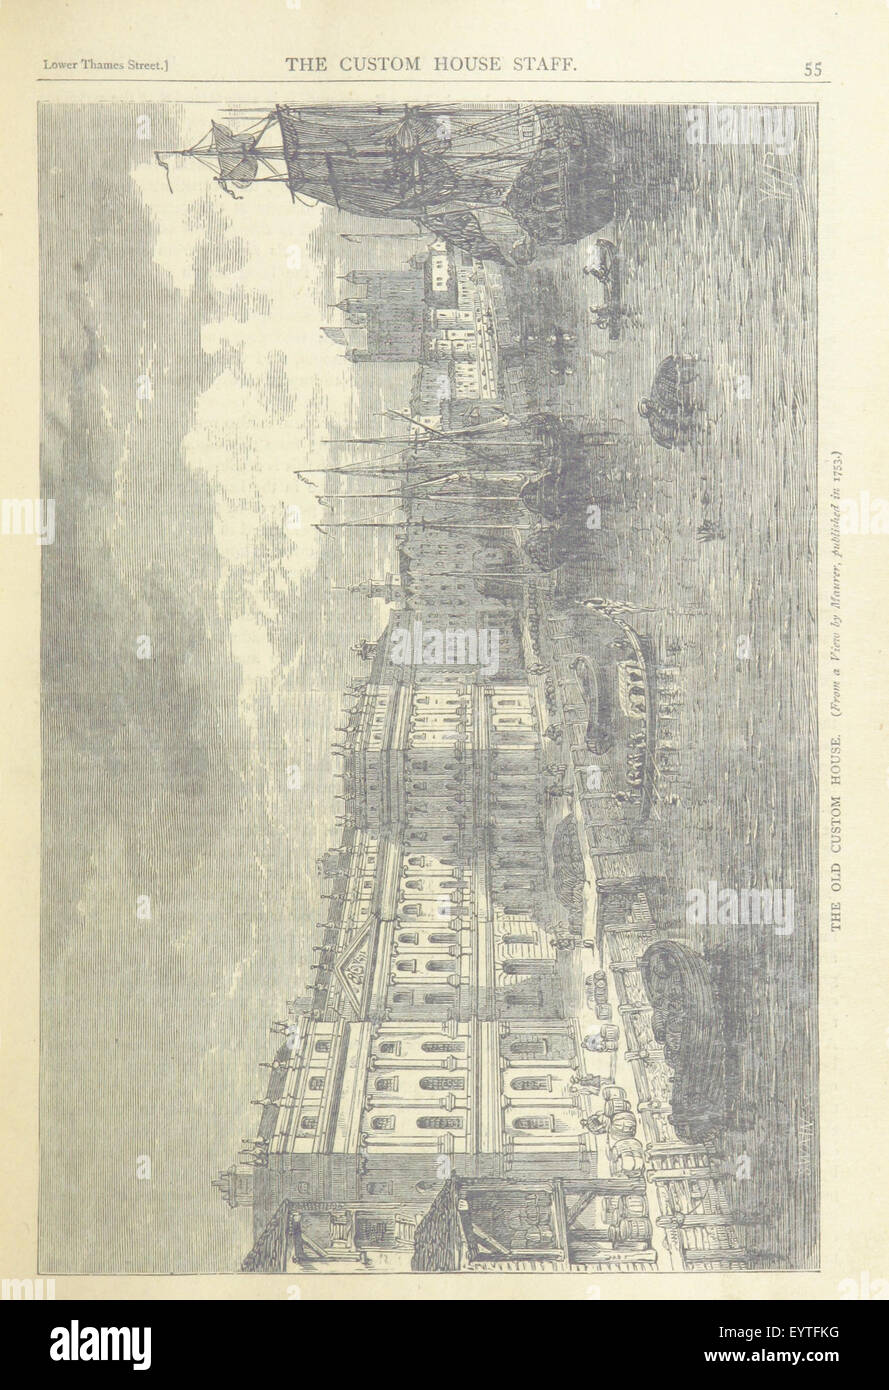 Image taken from page 77 of 'Old and New London; illustrated. A narrative of its history, its people, and its places. [vol. 1, 2,] by Walter Thornbury (vol. 3-6, by E. Walford)' Image taken from page 77 of 'Old and New London; Stock Photo